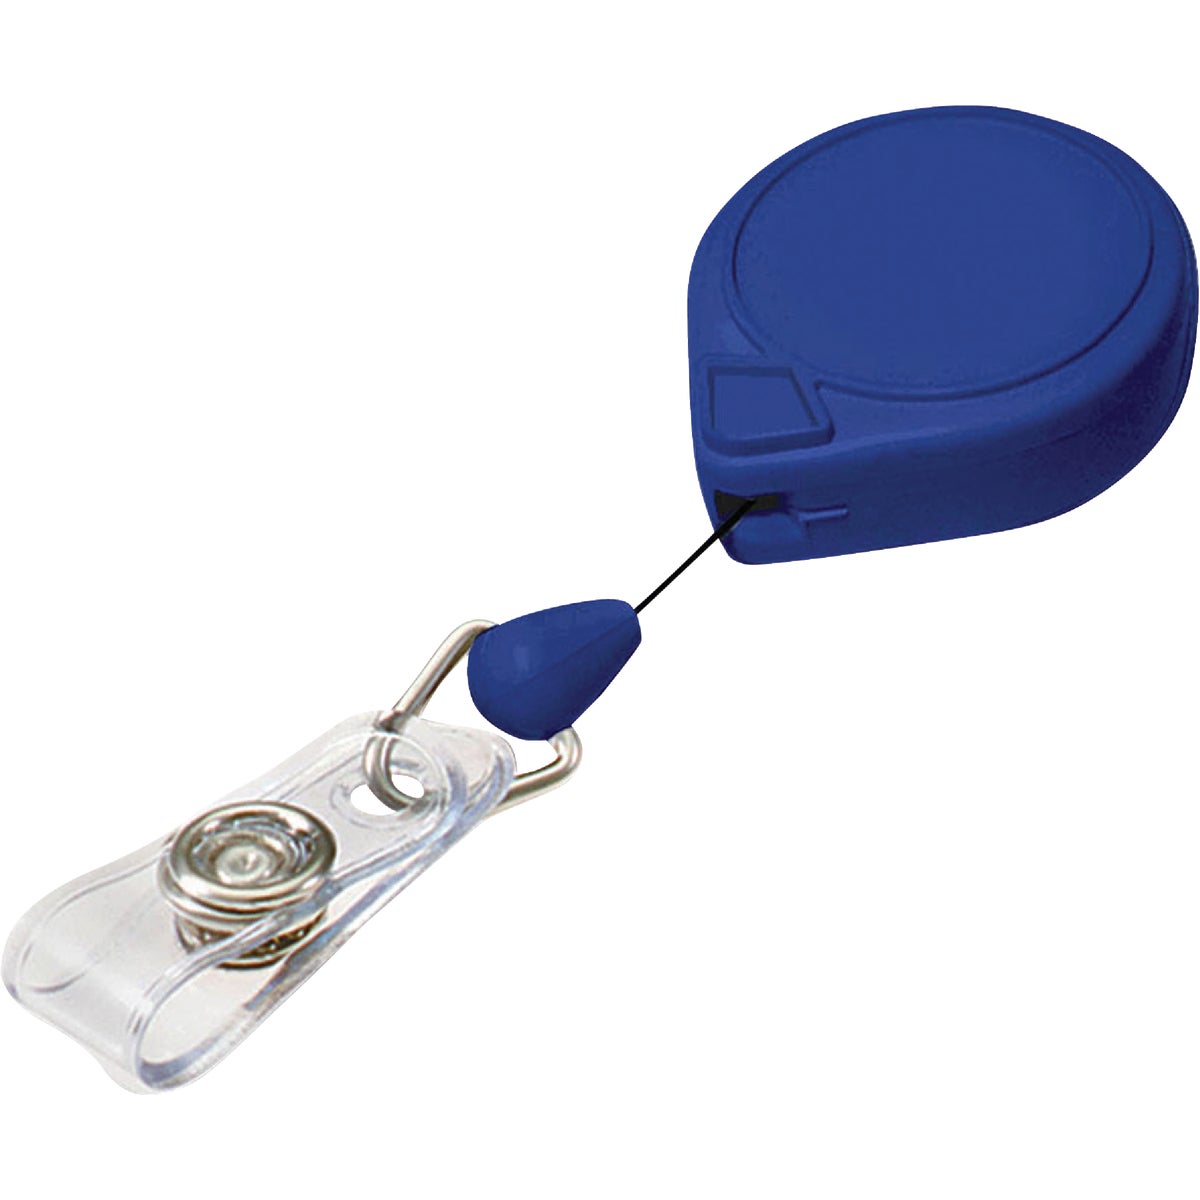 Item 584040, Durable, high-impact plastic case and 3-strand nylon cord with badge holder